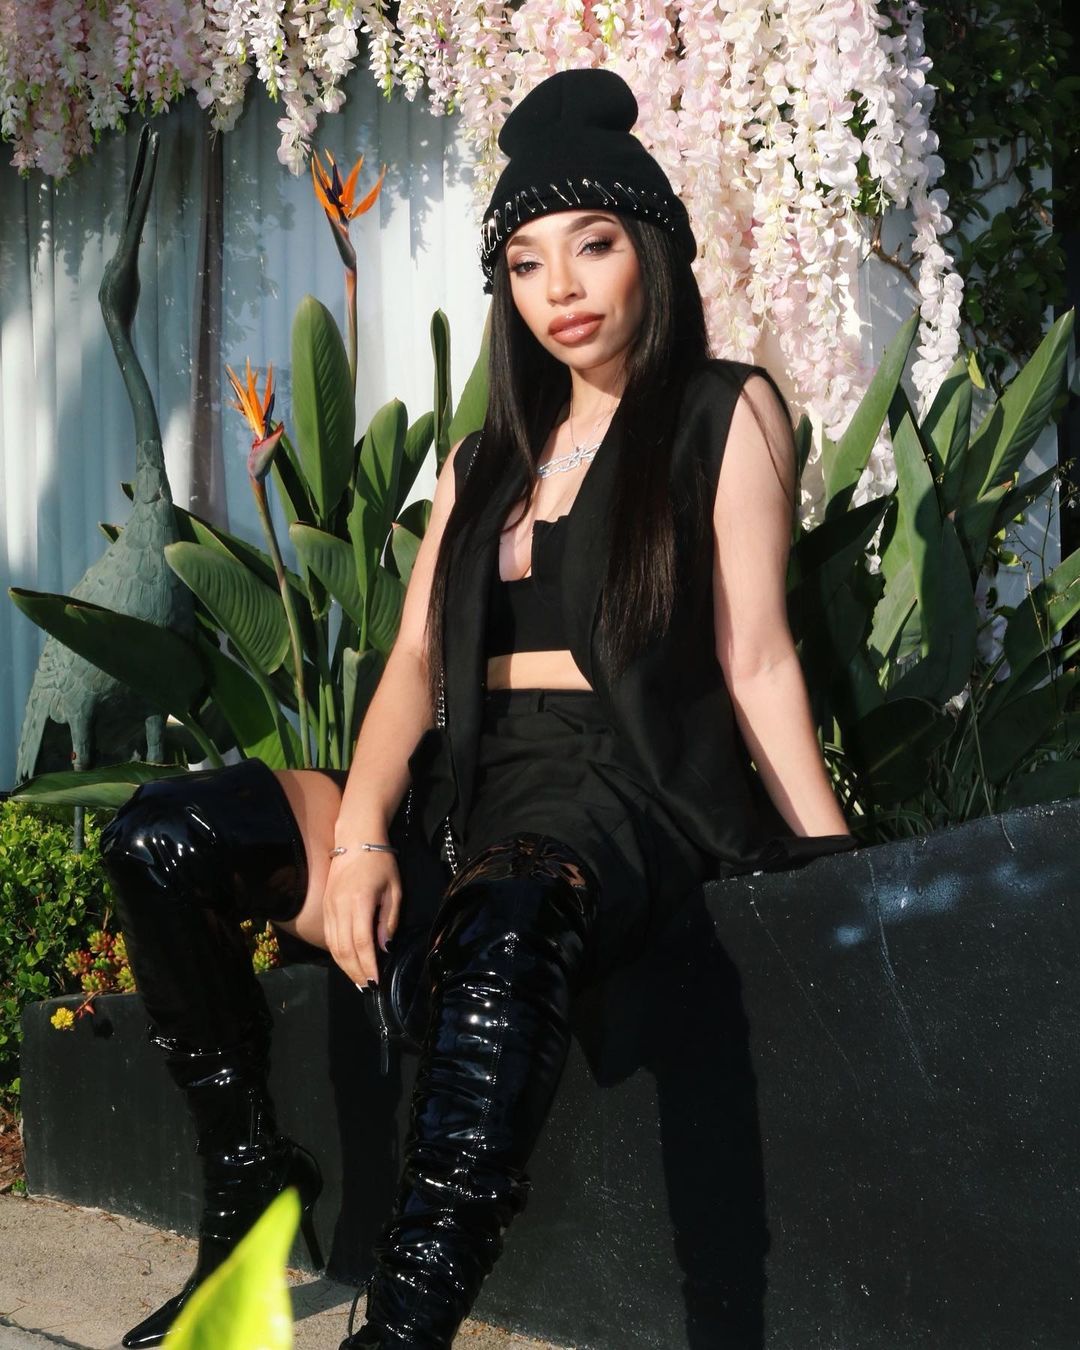 The daughter of the famous late rapper Eazy-E: Daijah Wright 